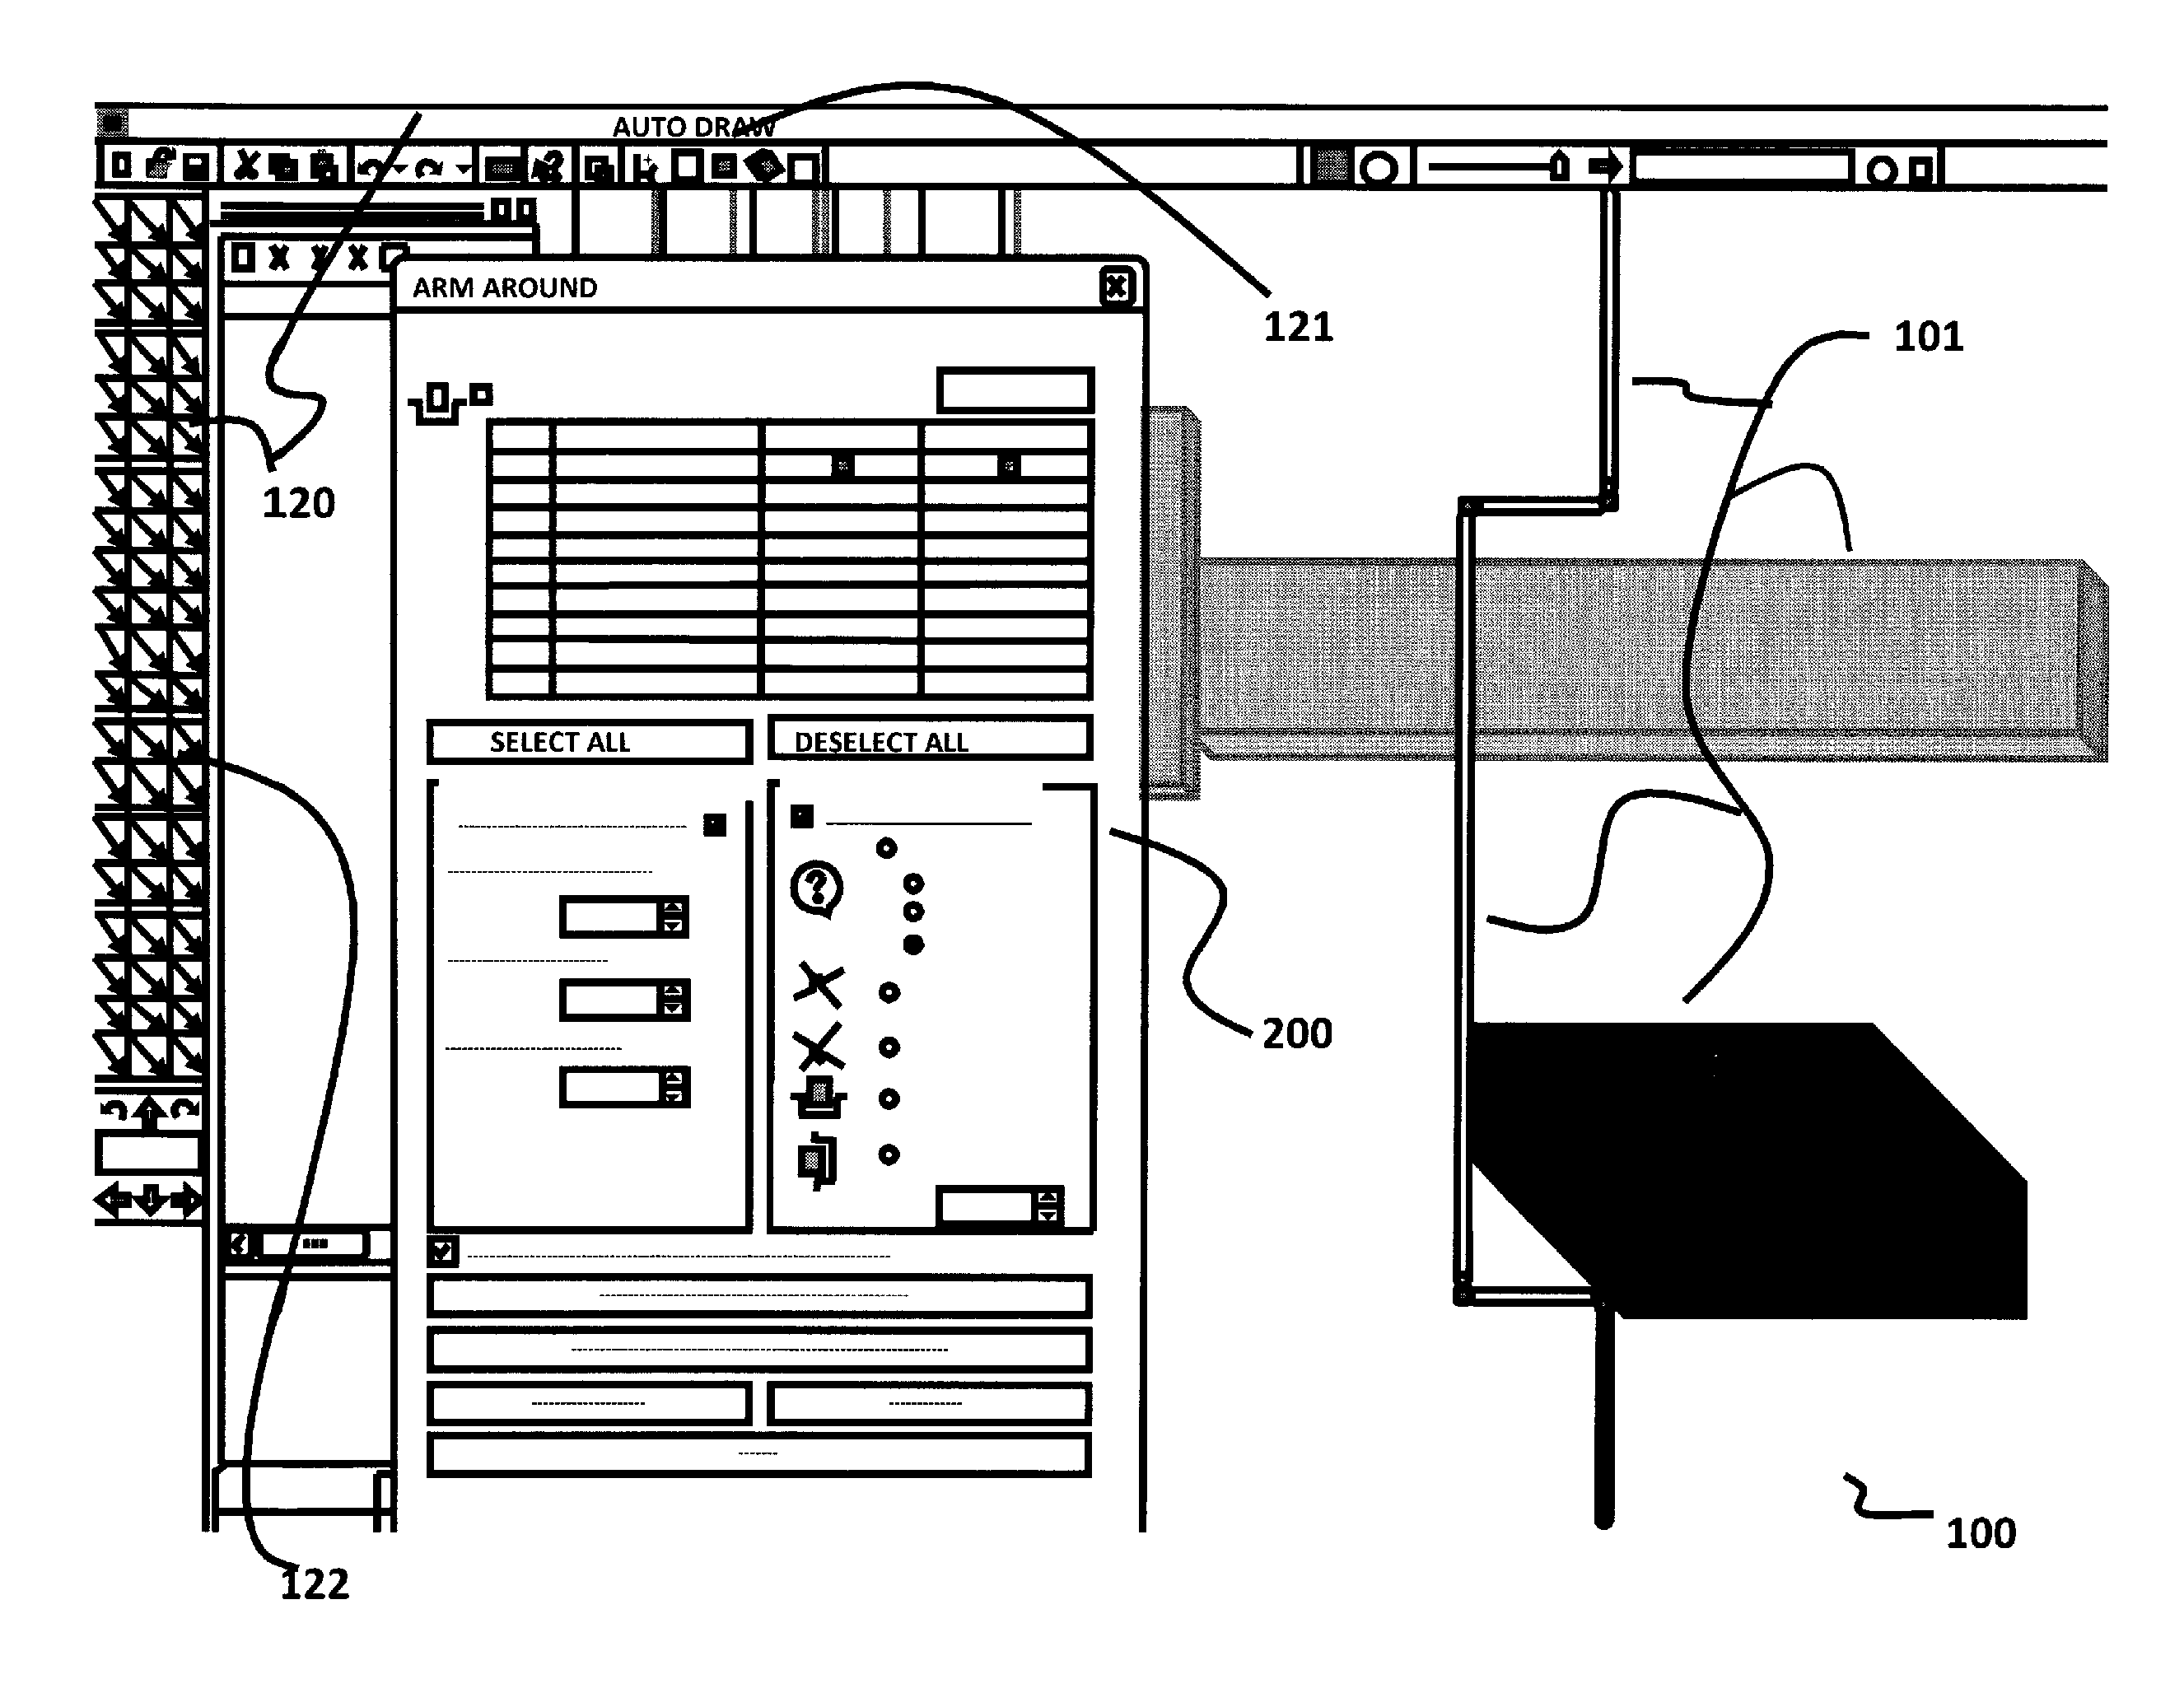 Methods and apparatuses for resolving a CAD drawing conflict with an arm around